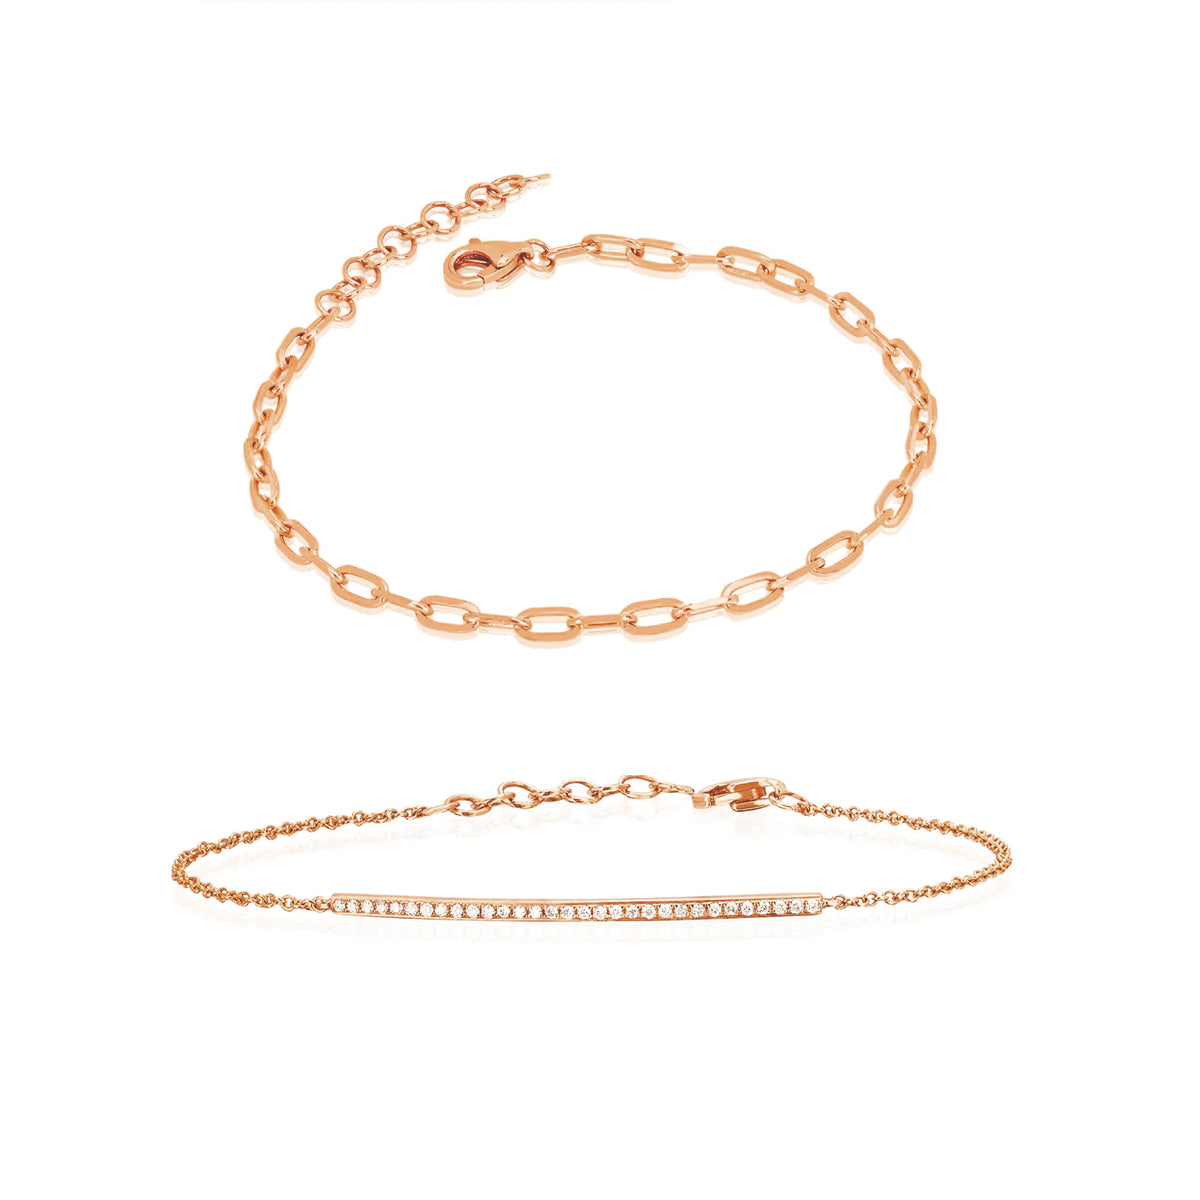 The Arm Candy Gift Set in 14k Rose Gold